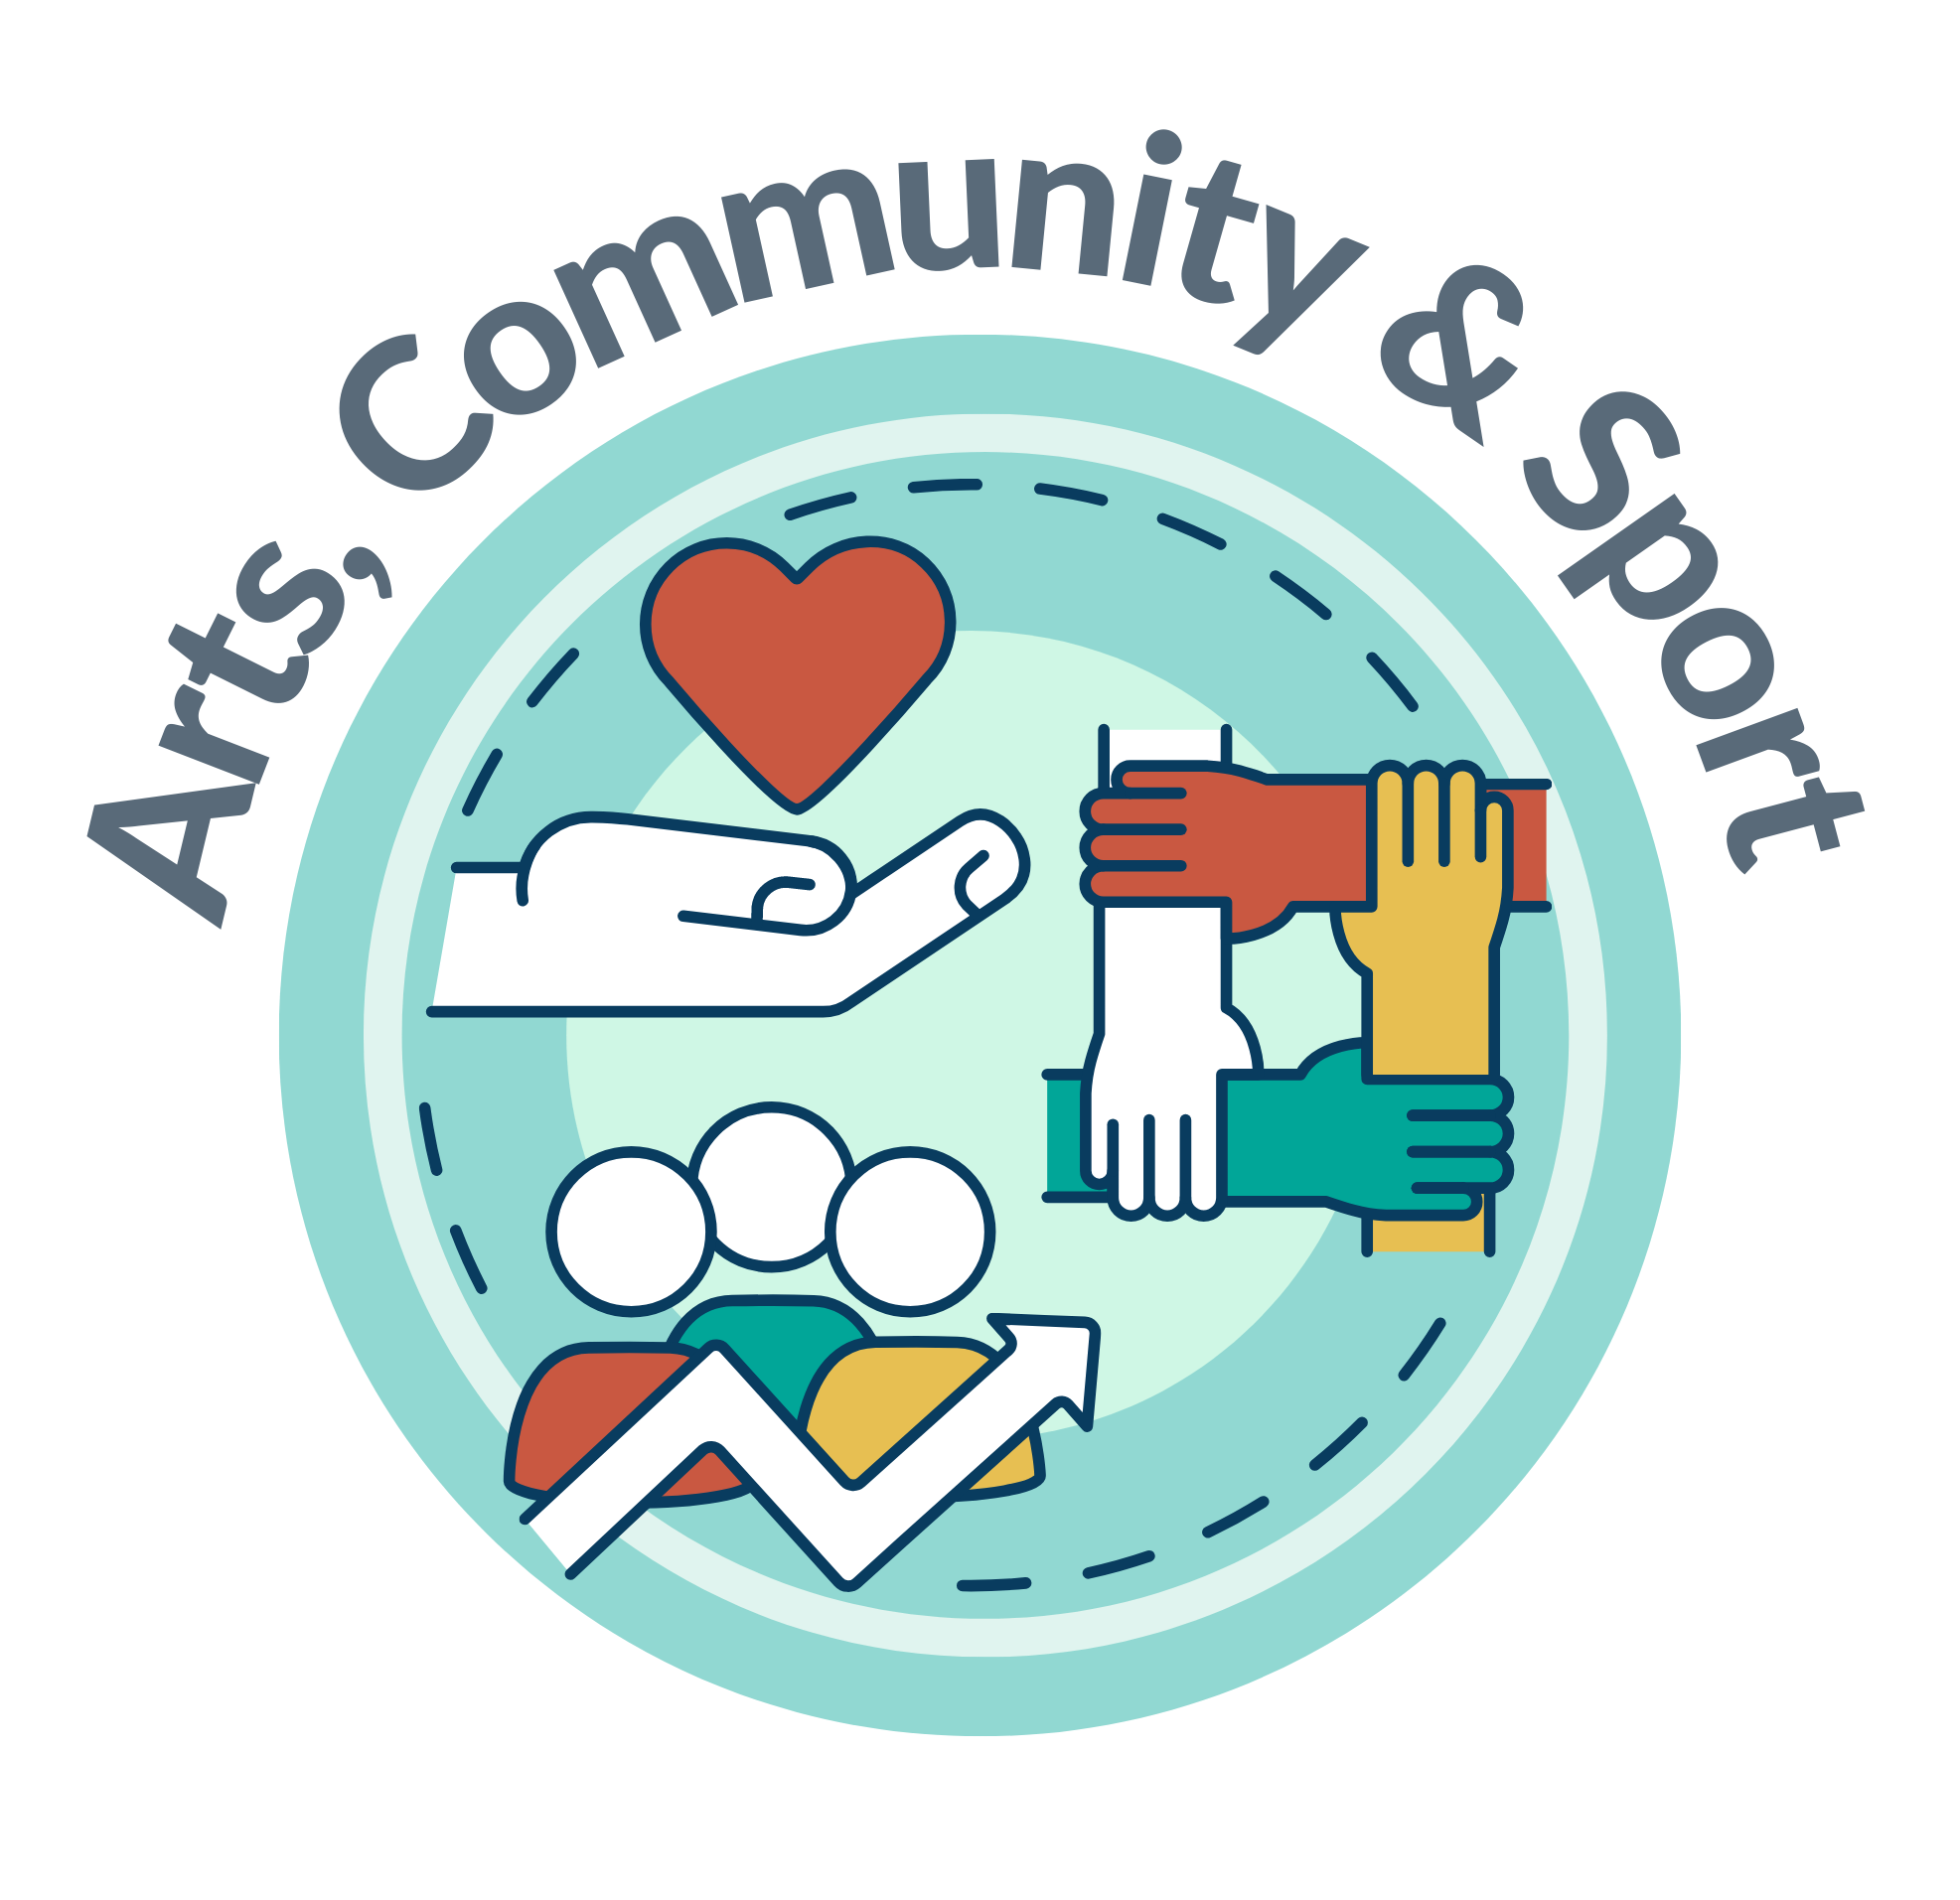 Arts, Community, Sport and Tourism Linkage Group